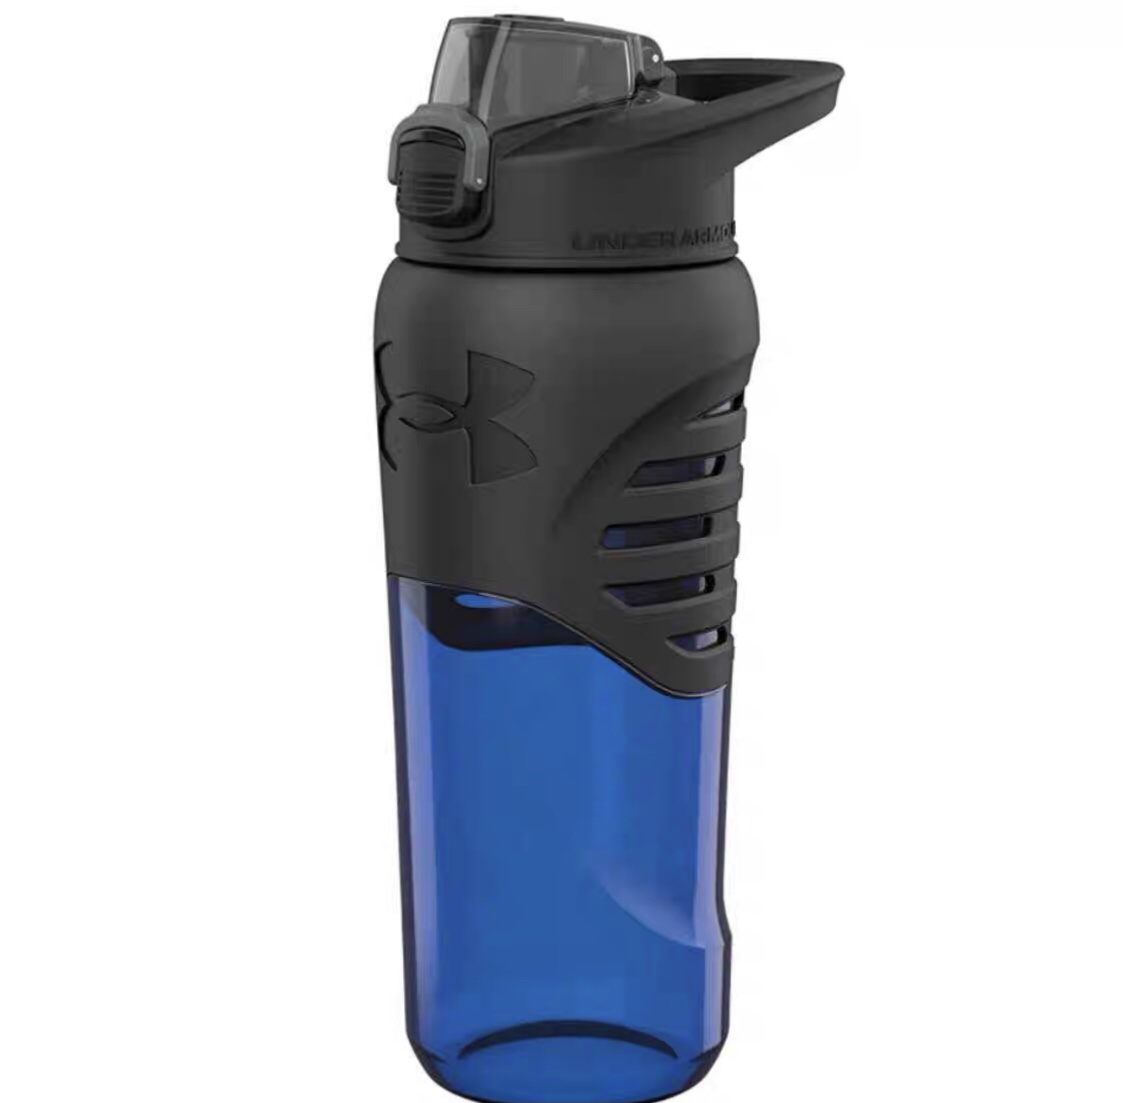 ƸUNDER ARMOUR UA THERMOS FITNESS CYCLING RUNNING SPORTS WATER BOTTLE CUP-